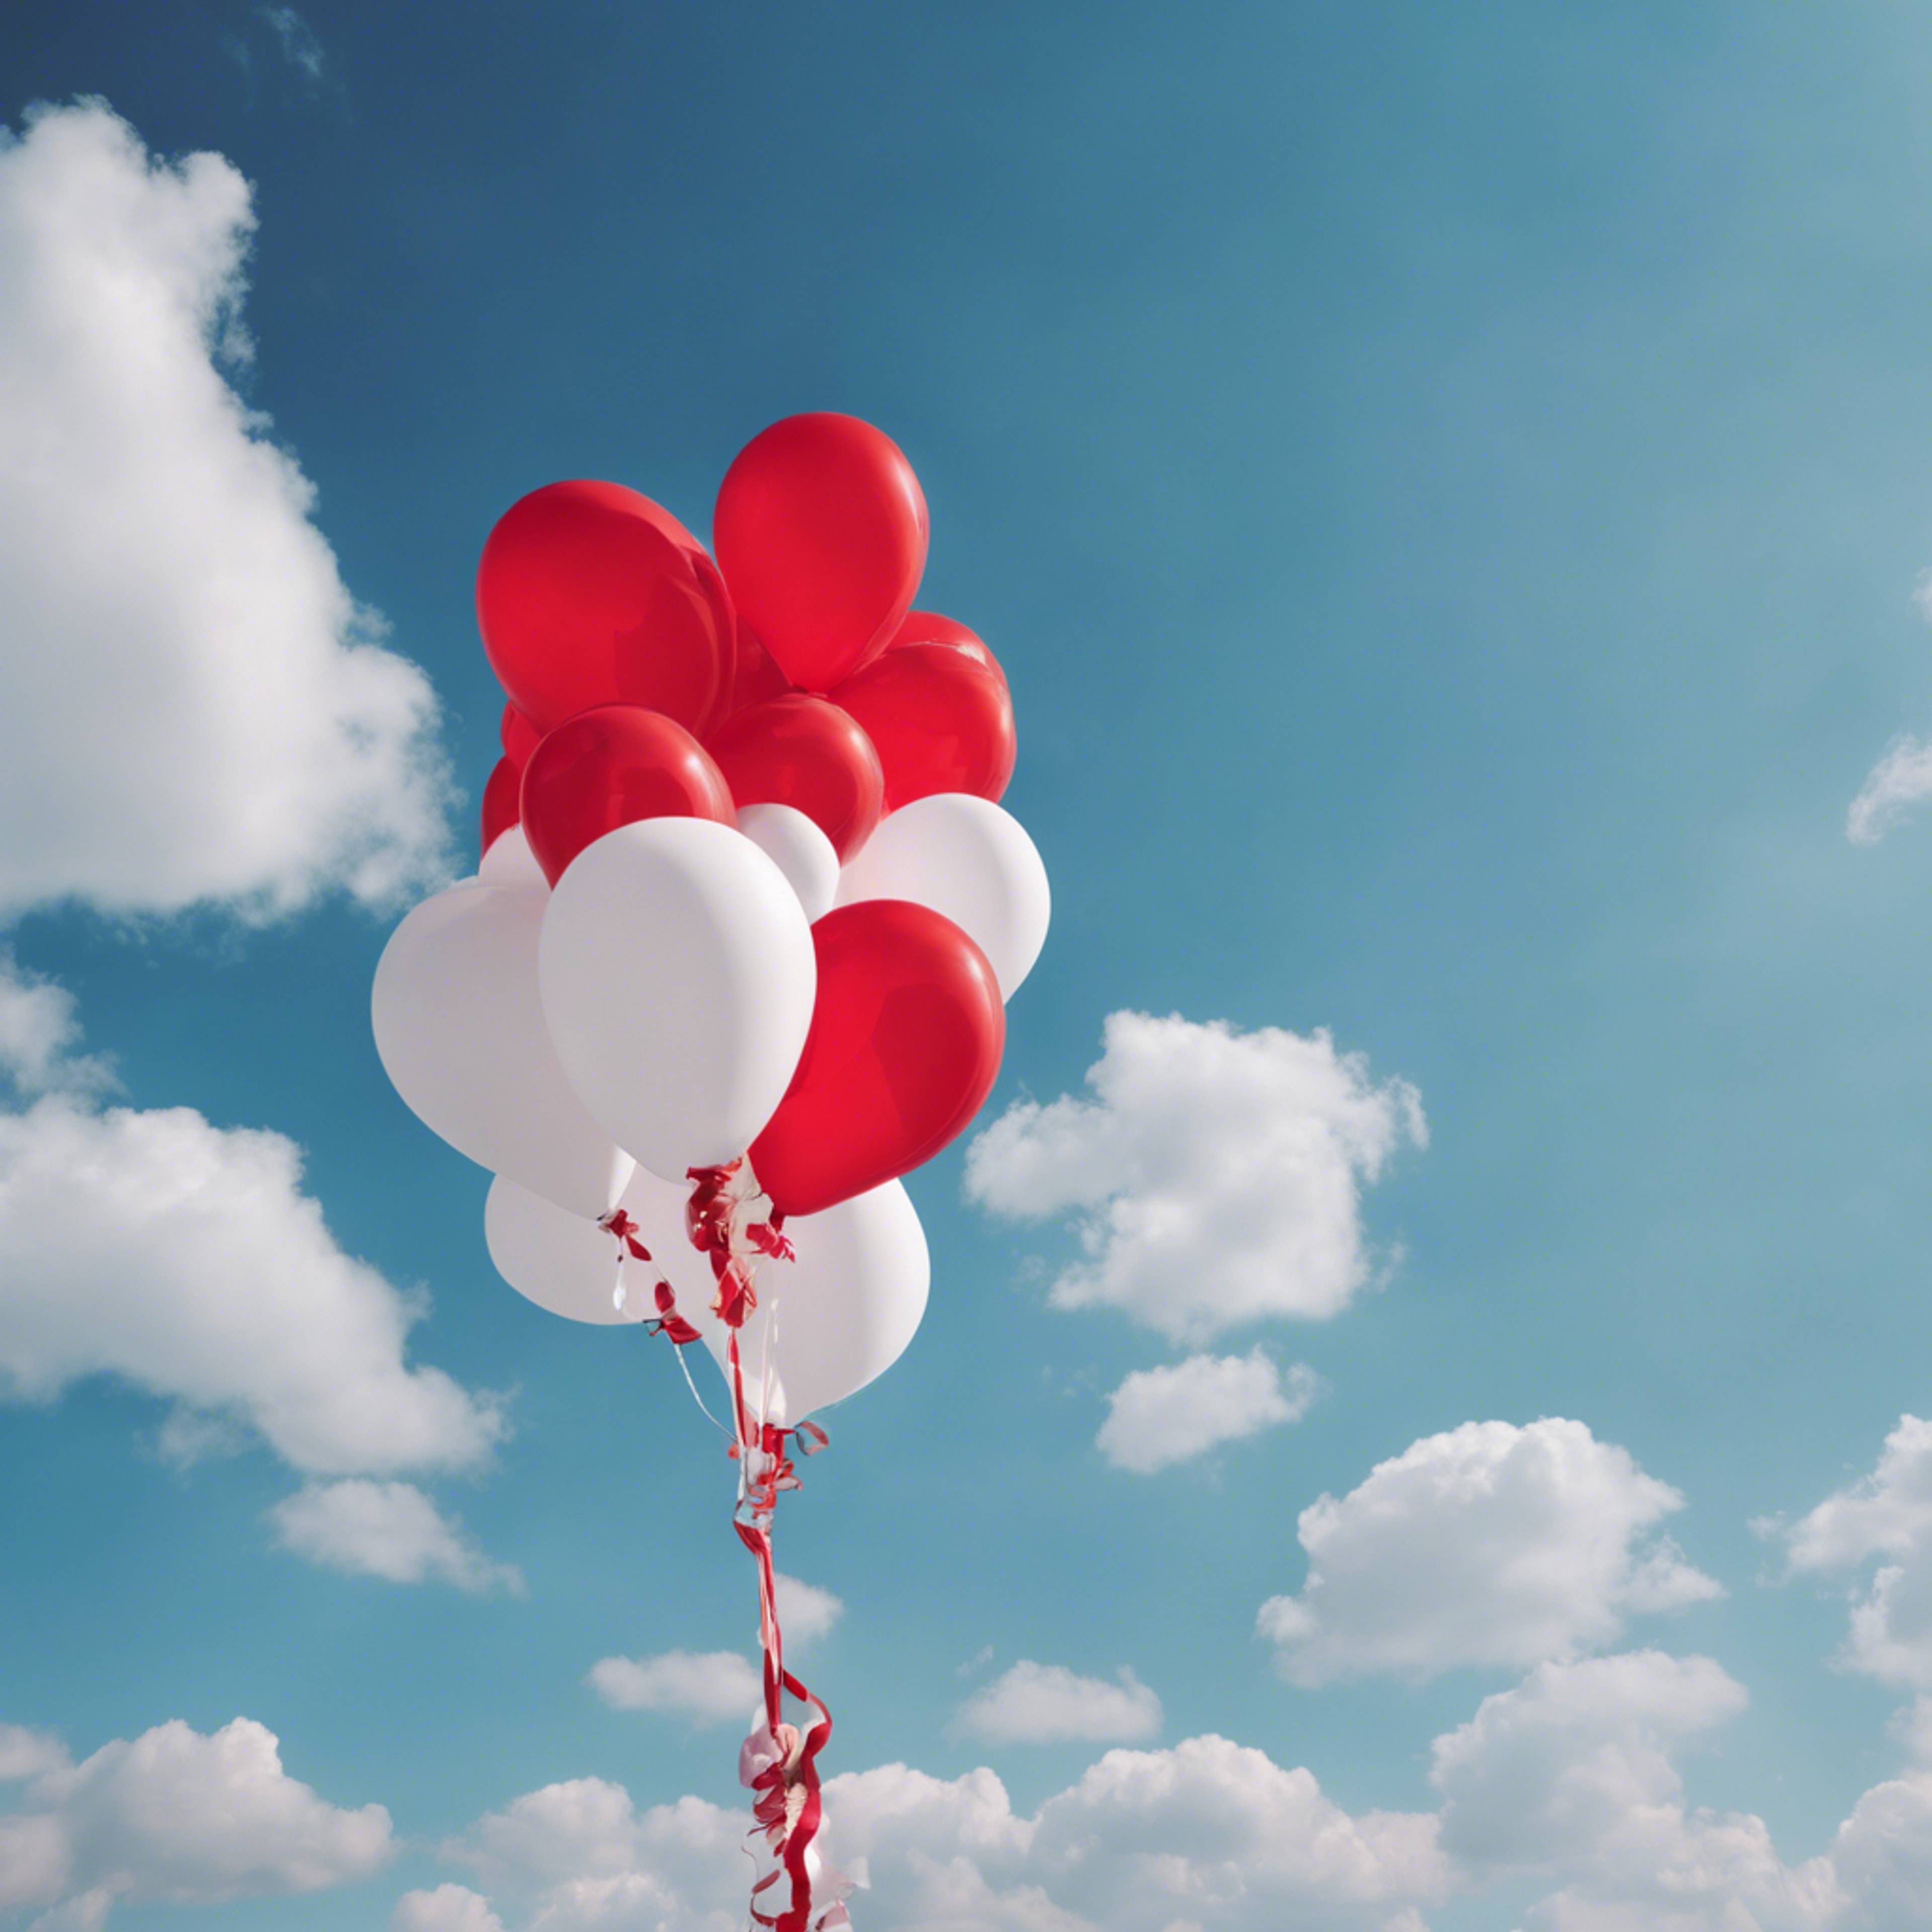 Festive red and white balloons strung together against the blue sky. Wallpaper[5b7b2fc281444a4c8d70]